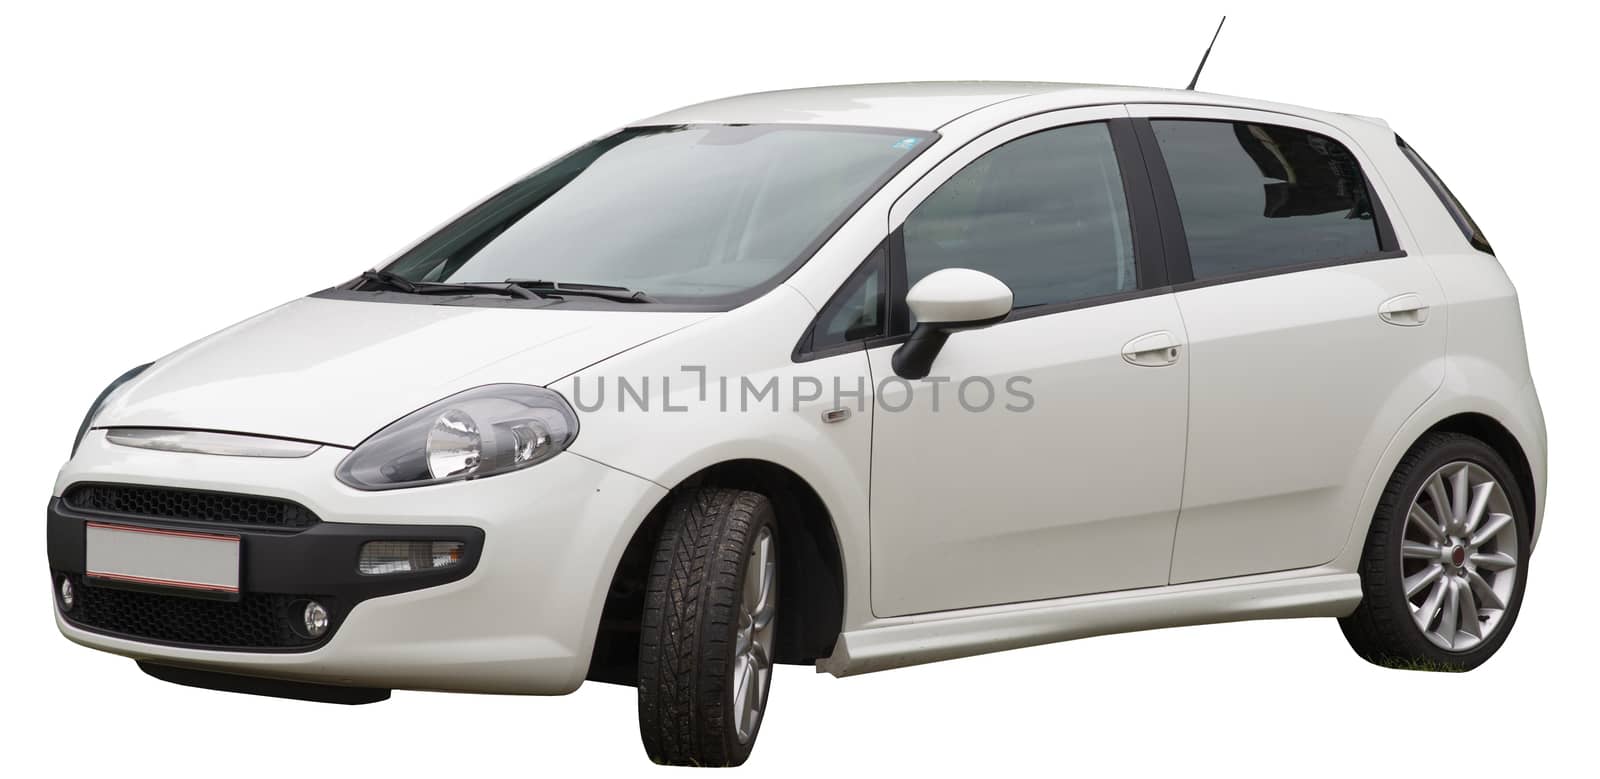 White car on isolated white background, side view